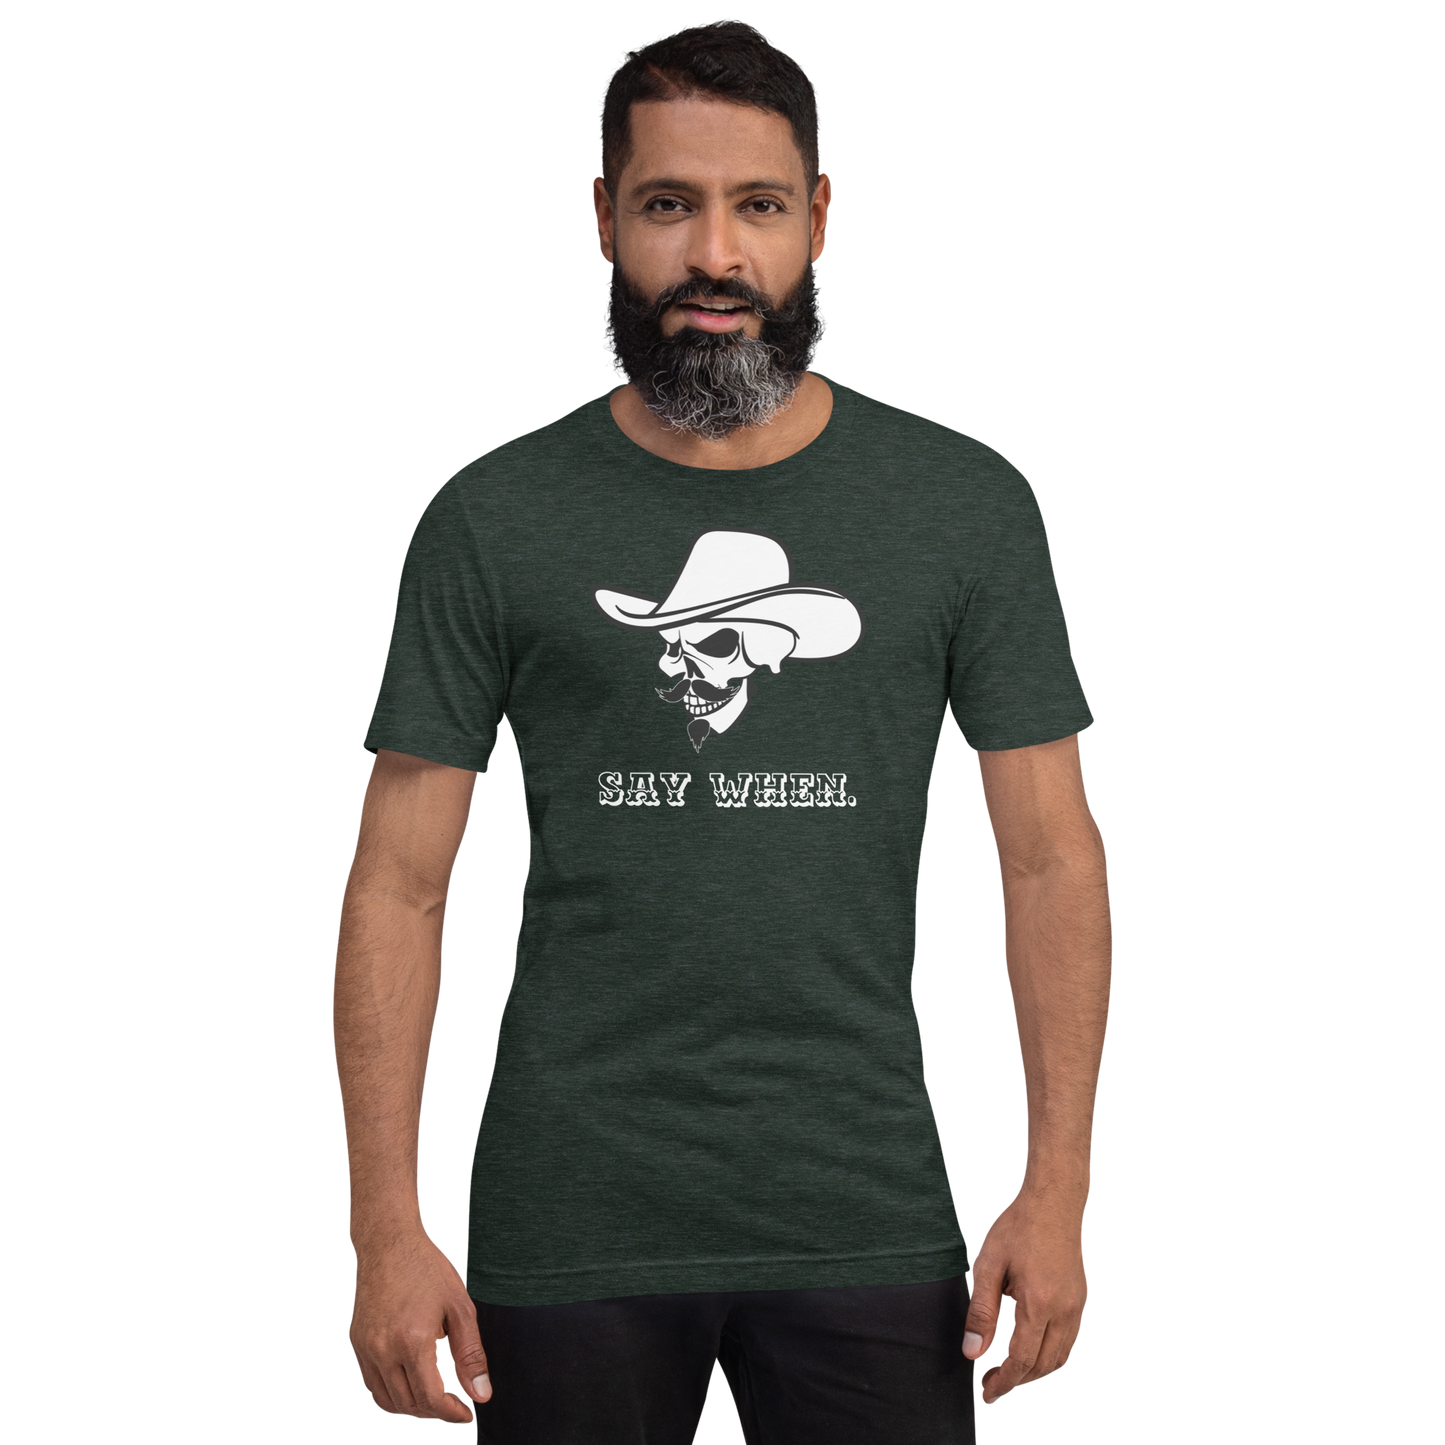 Say When Shirt | Doc Holliday Quote Mens T-Shirt by Say When Clothing Company (S - 4XL, Multiple Colors)